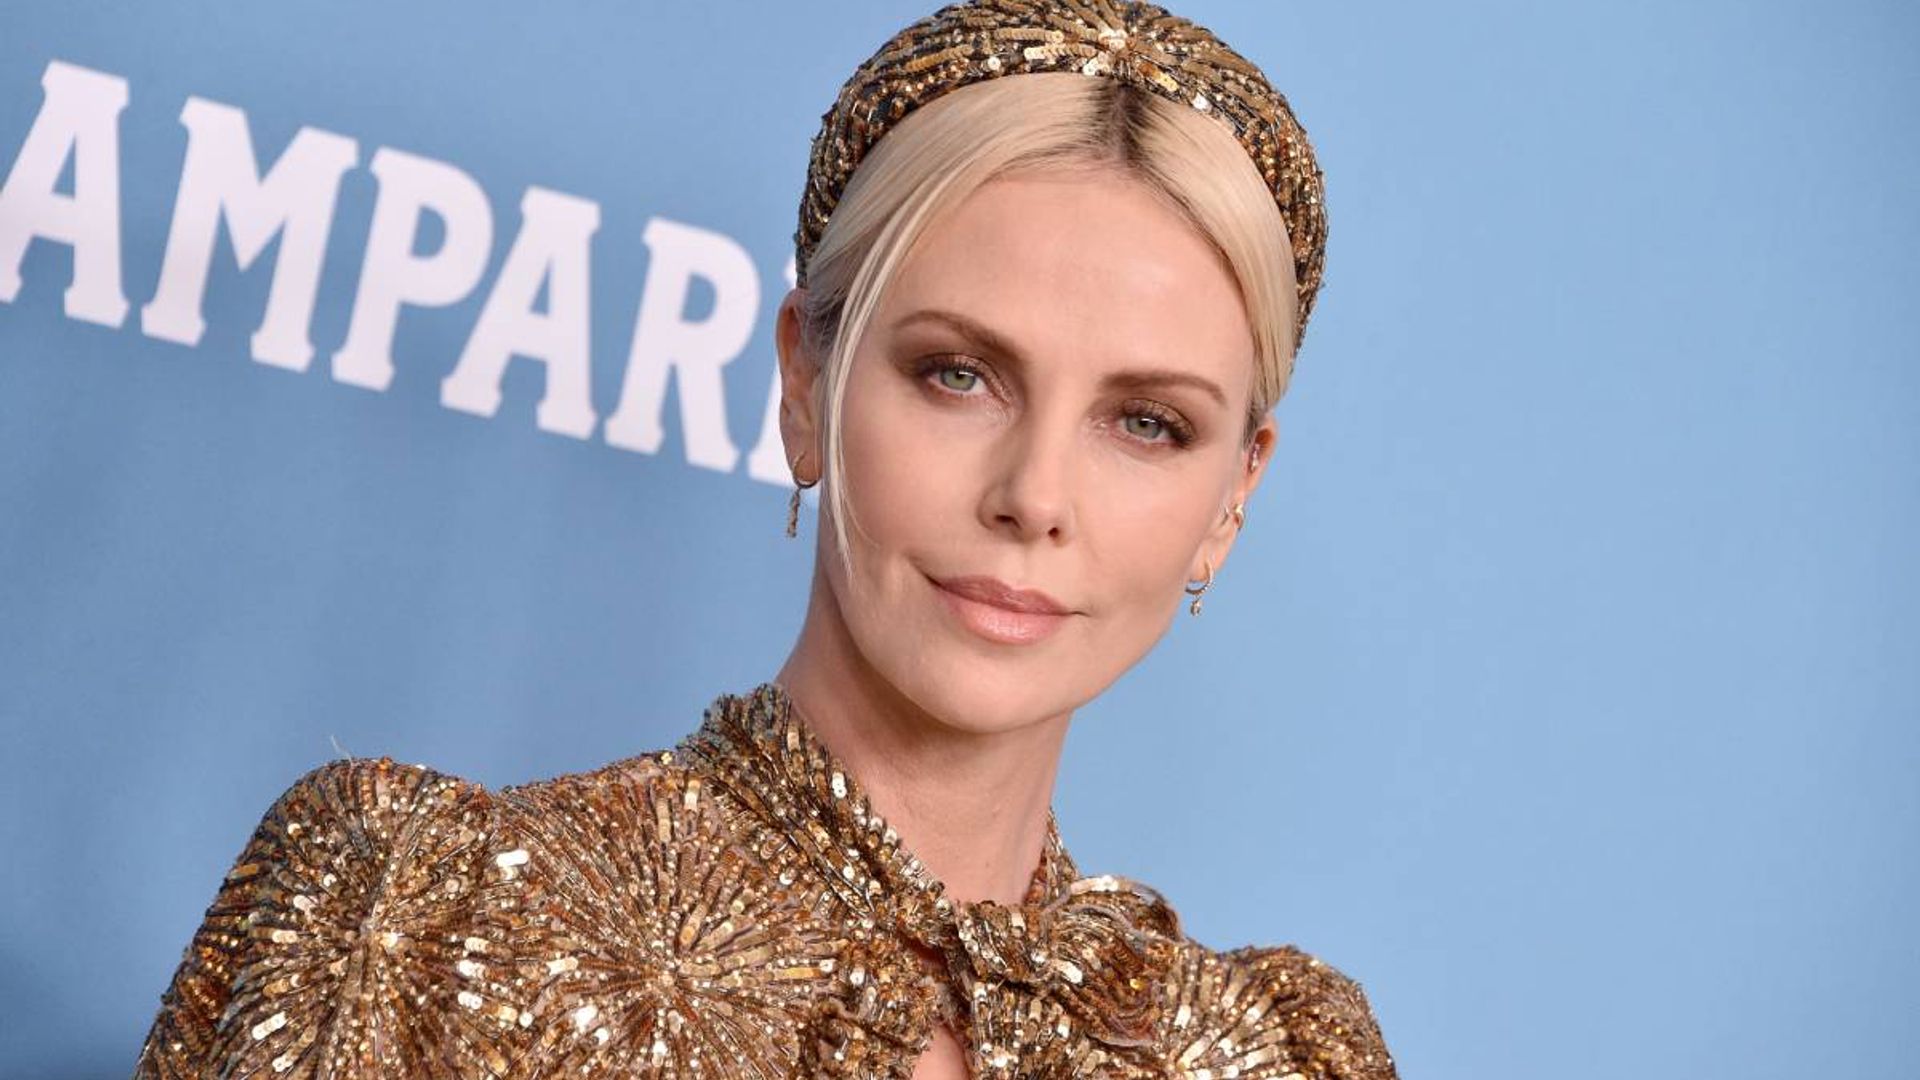 Charlize Theron’s neon sneakers will be at the top of your wish list